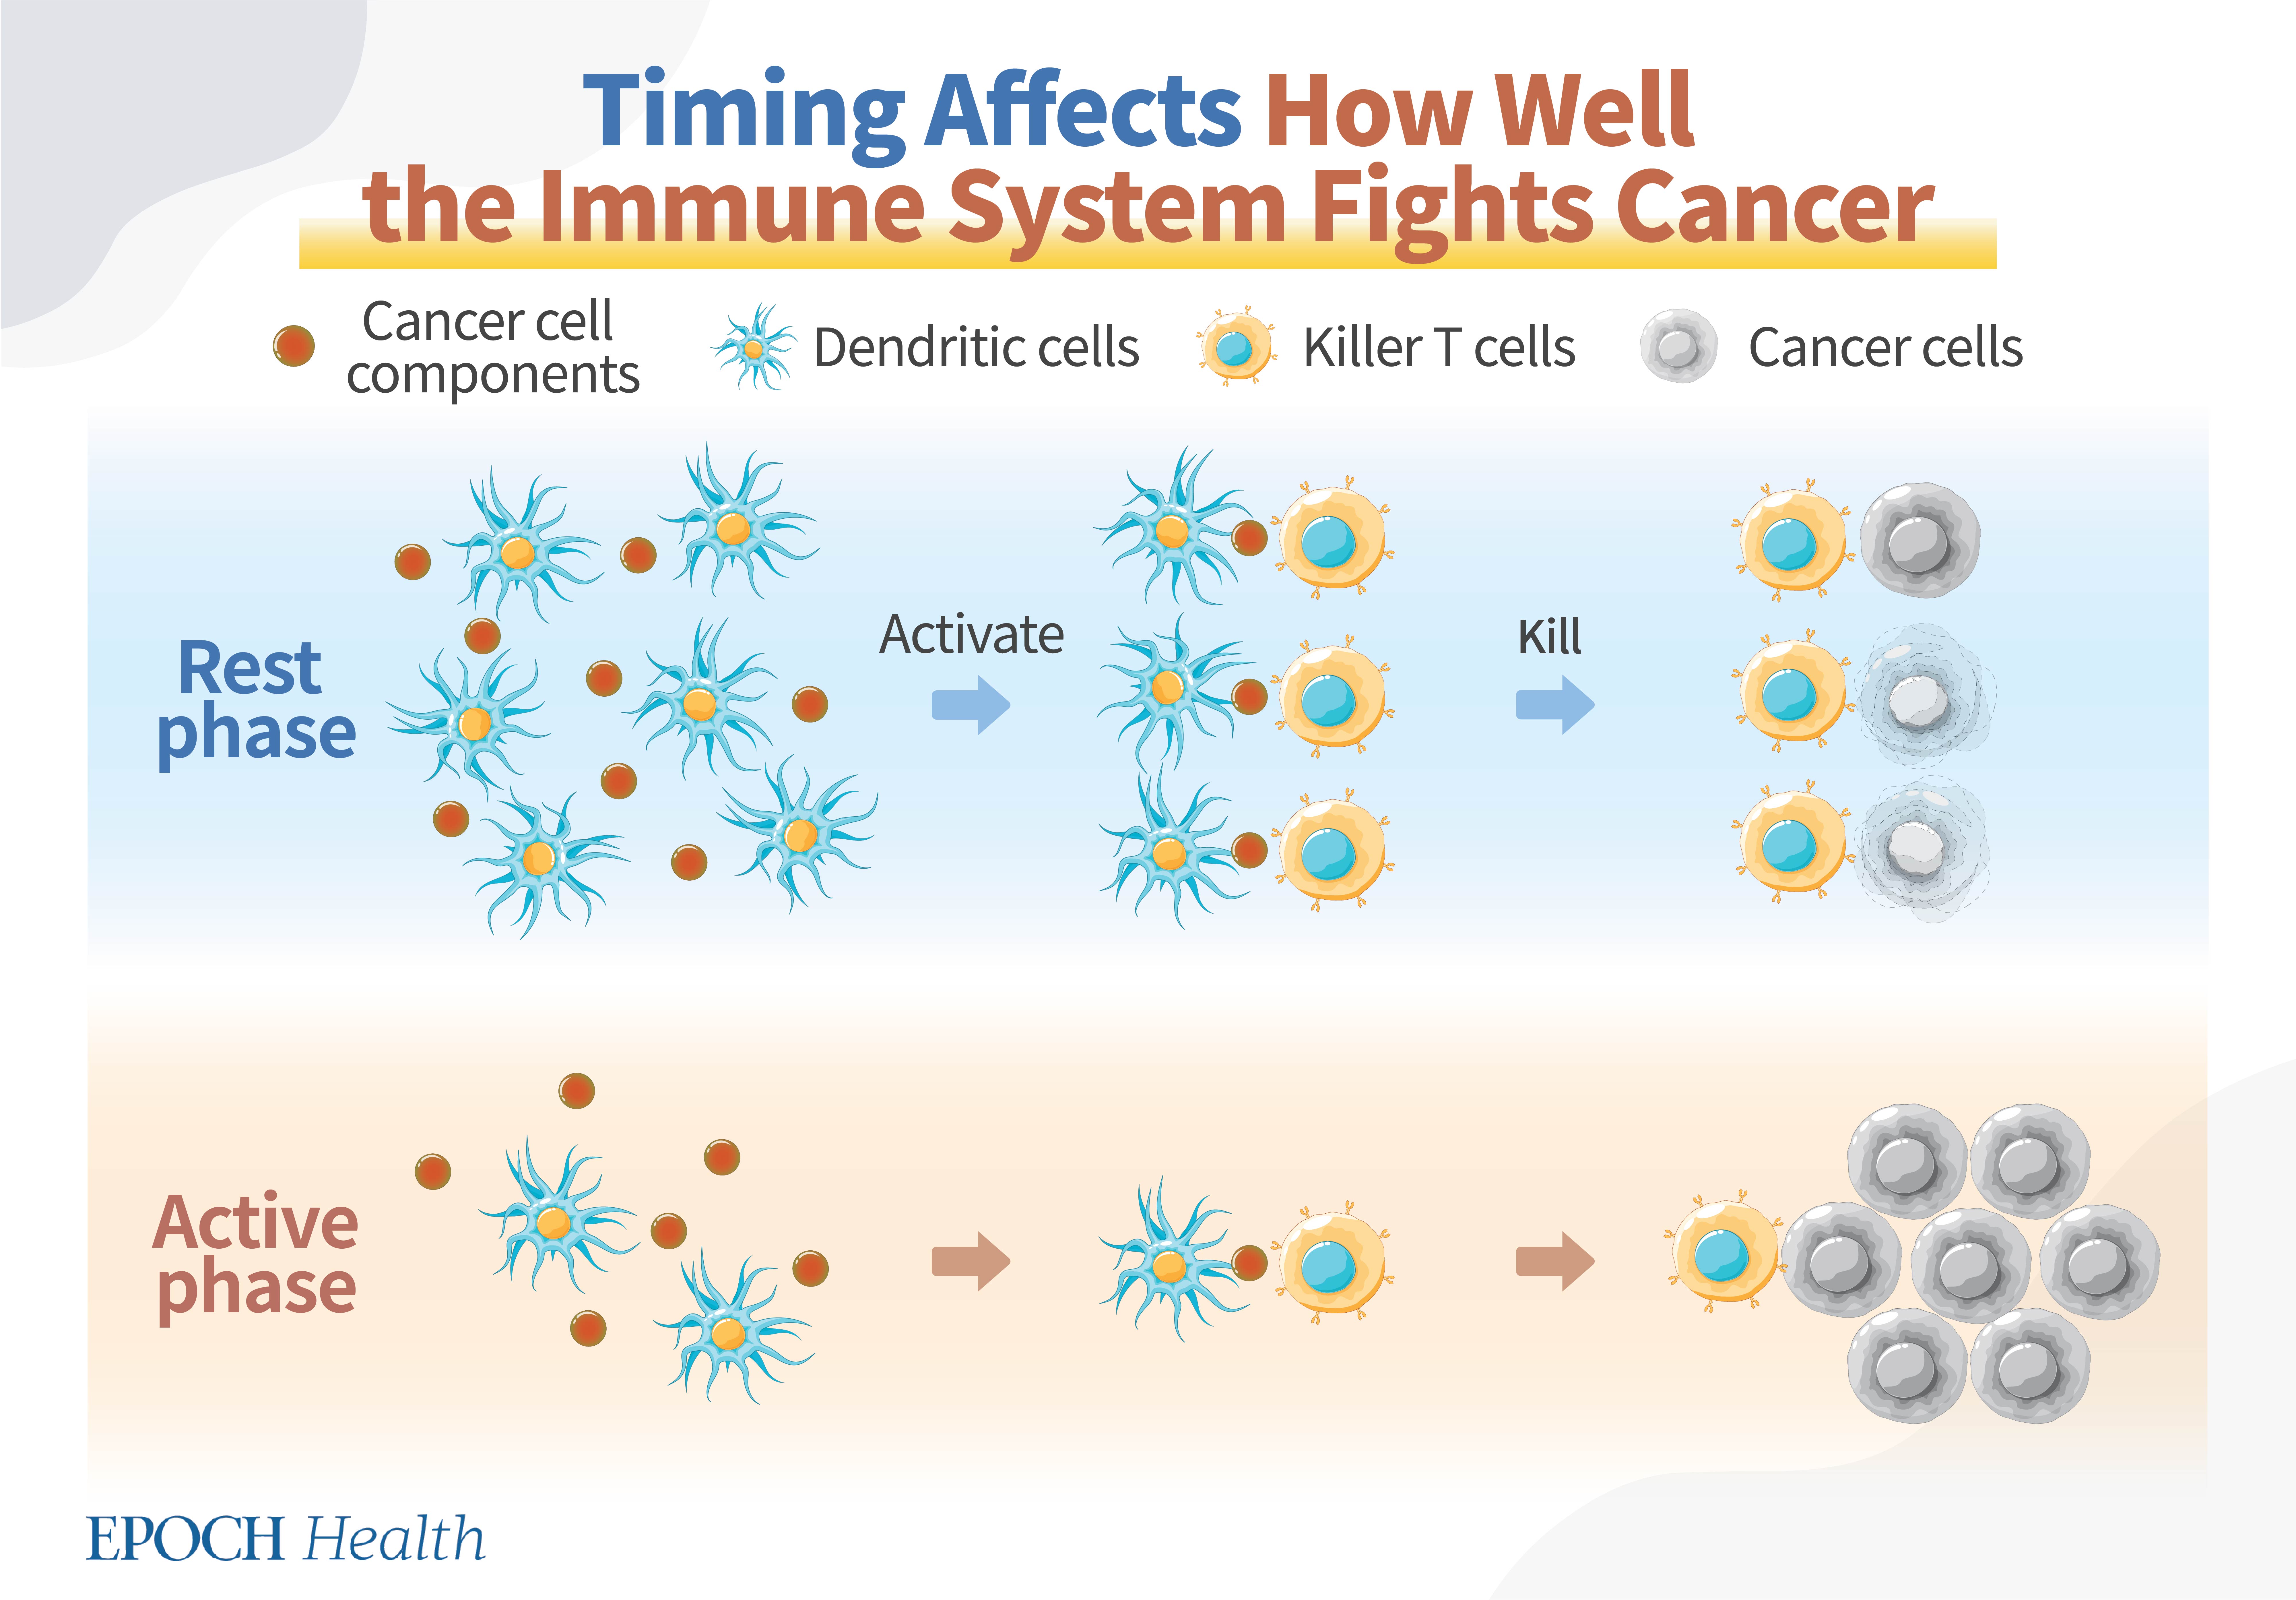 The effectiveness of the immune system in clearing cancer cells varies depending on the timing of the treatment. (The Epoch Times)